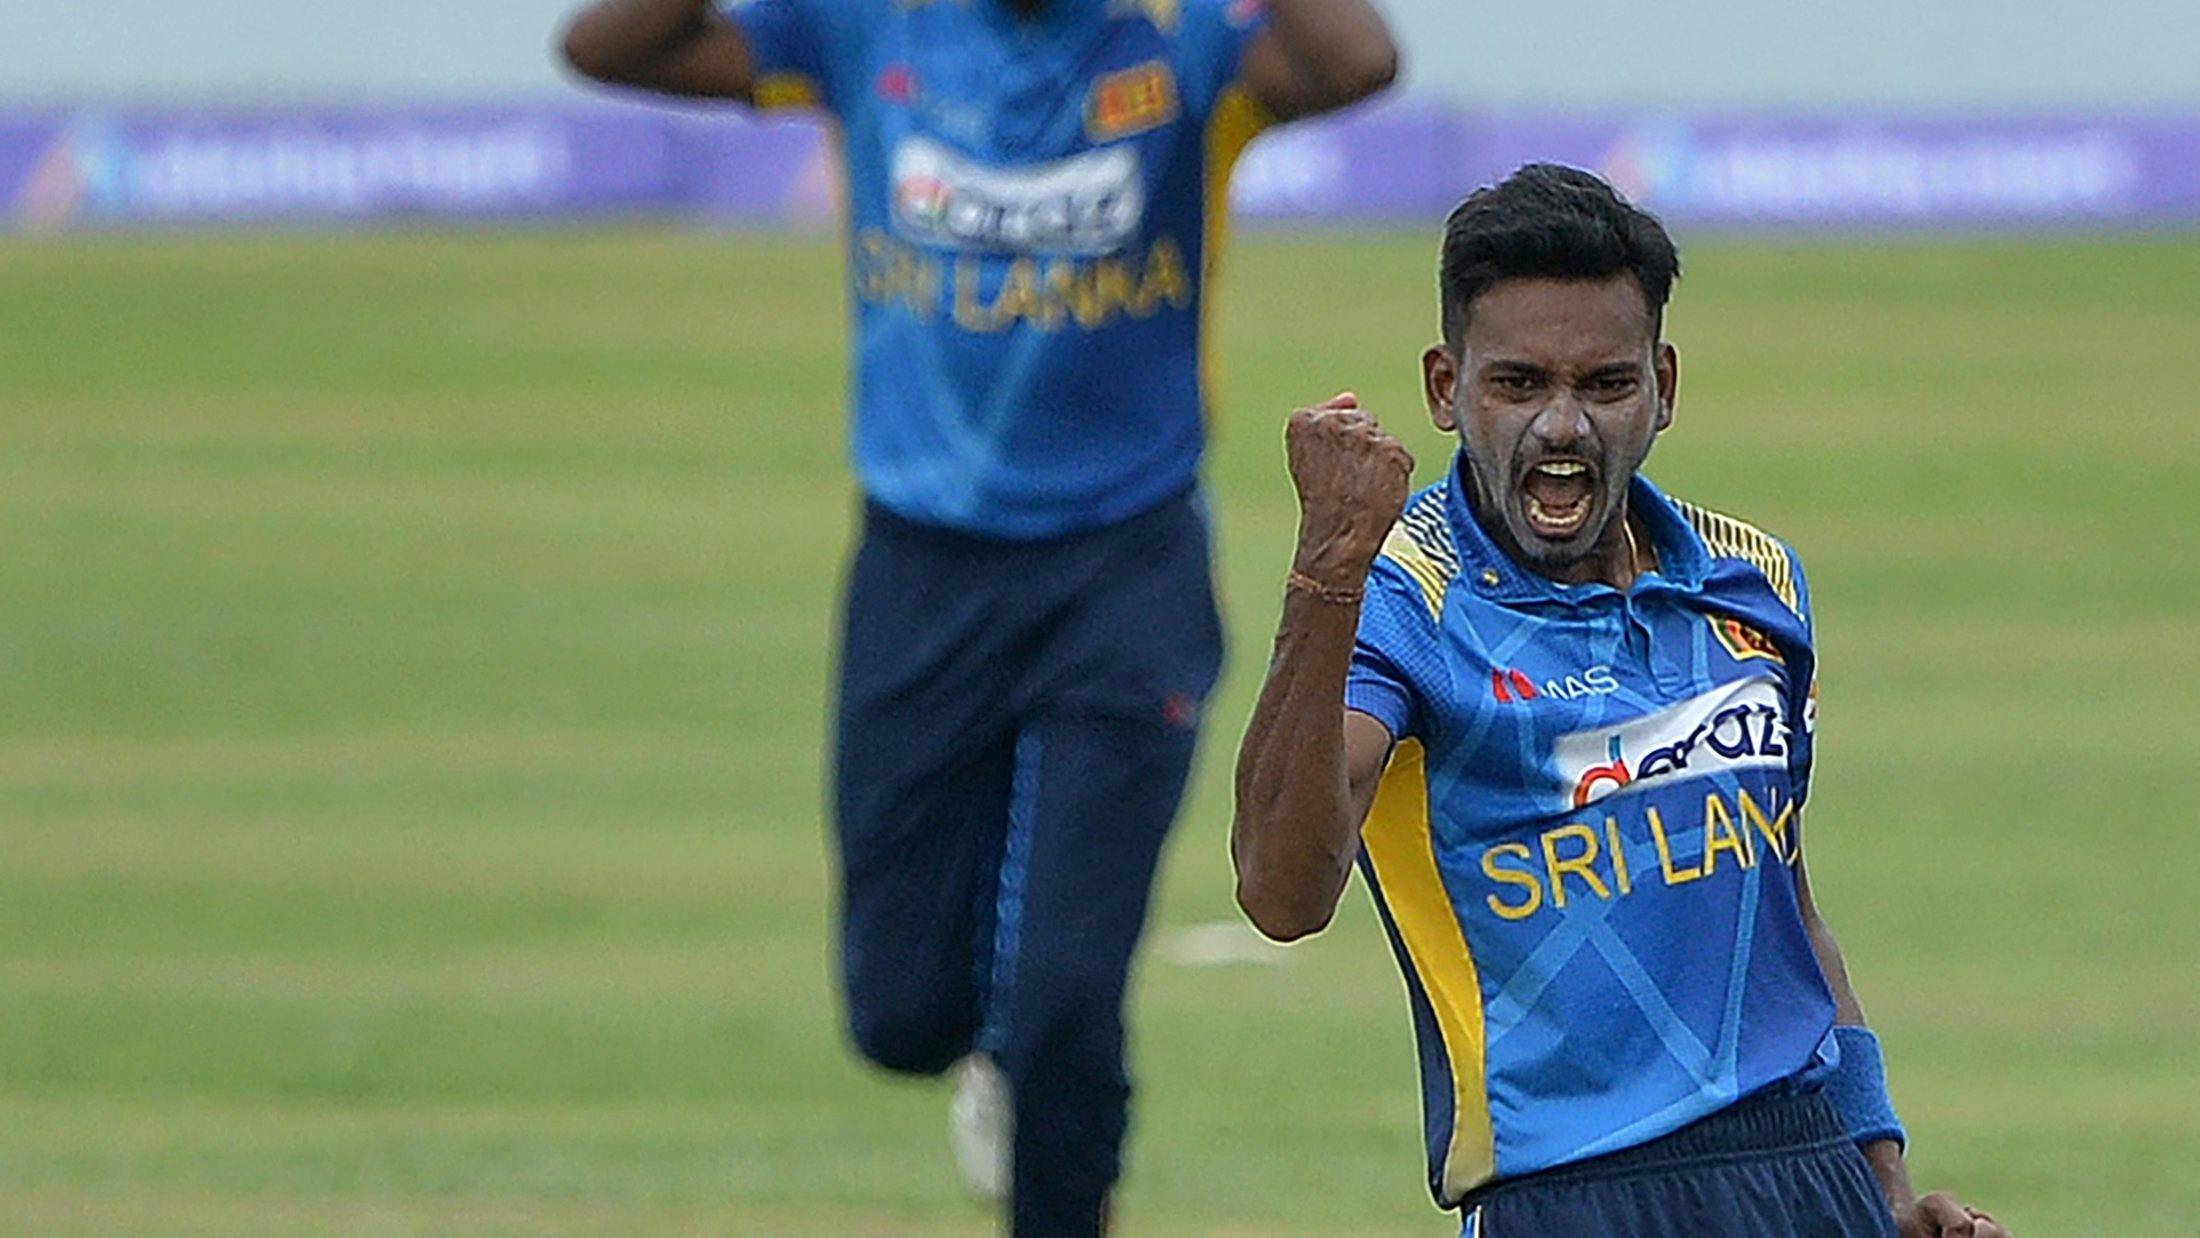 SL vs UAE, T20 World Cup 2022 - Dushmantha Chameera ruled out of